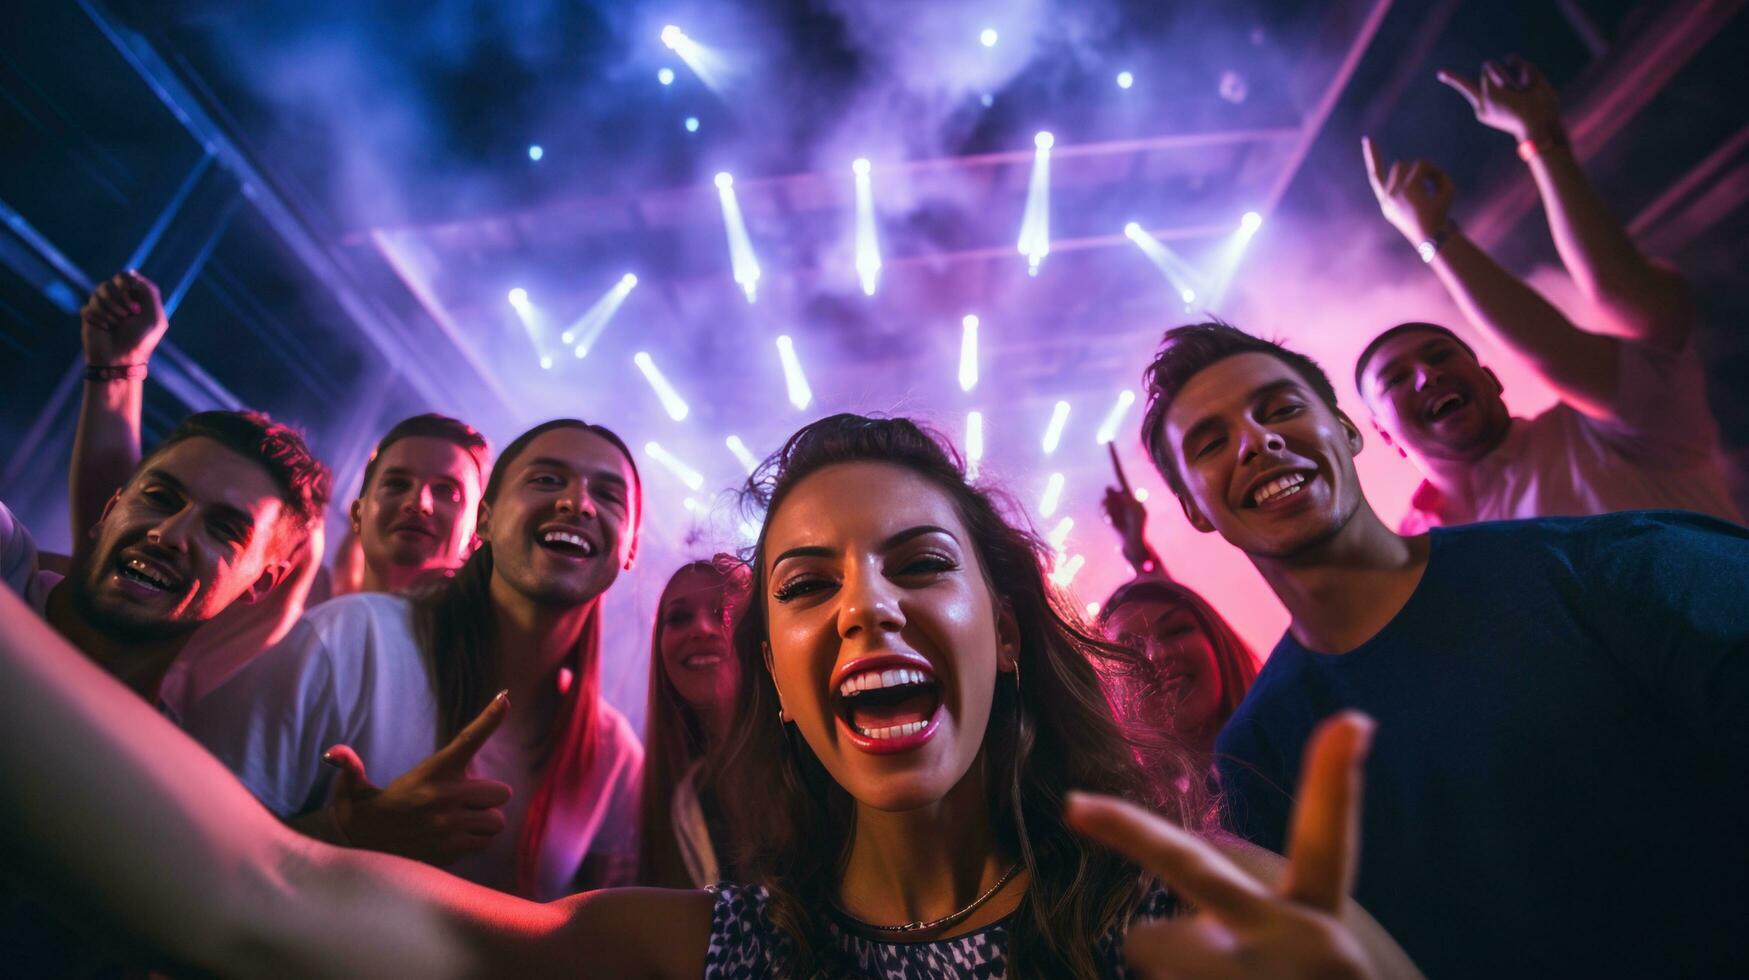 AI generated A group of people in trendy outfits posing for a selfie with the DJ in the background, photo